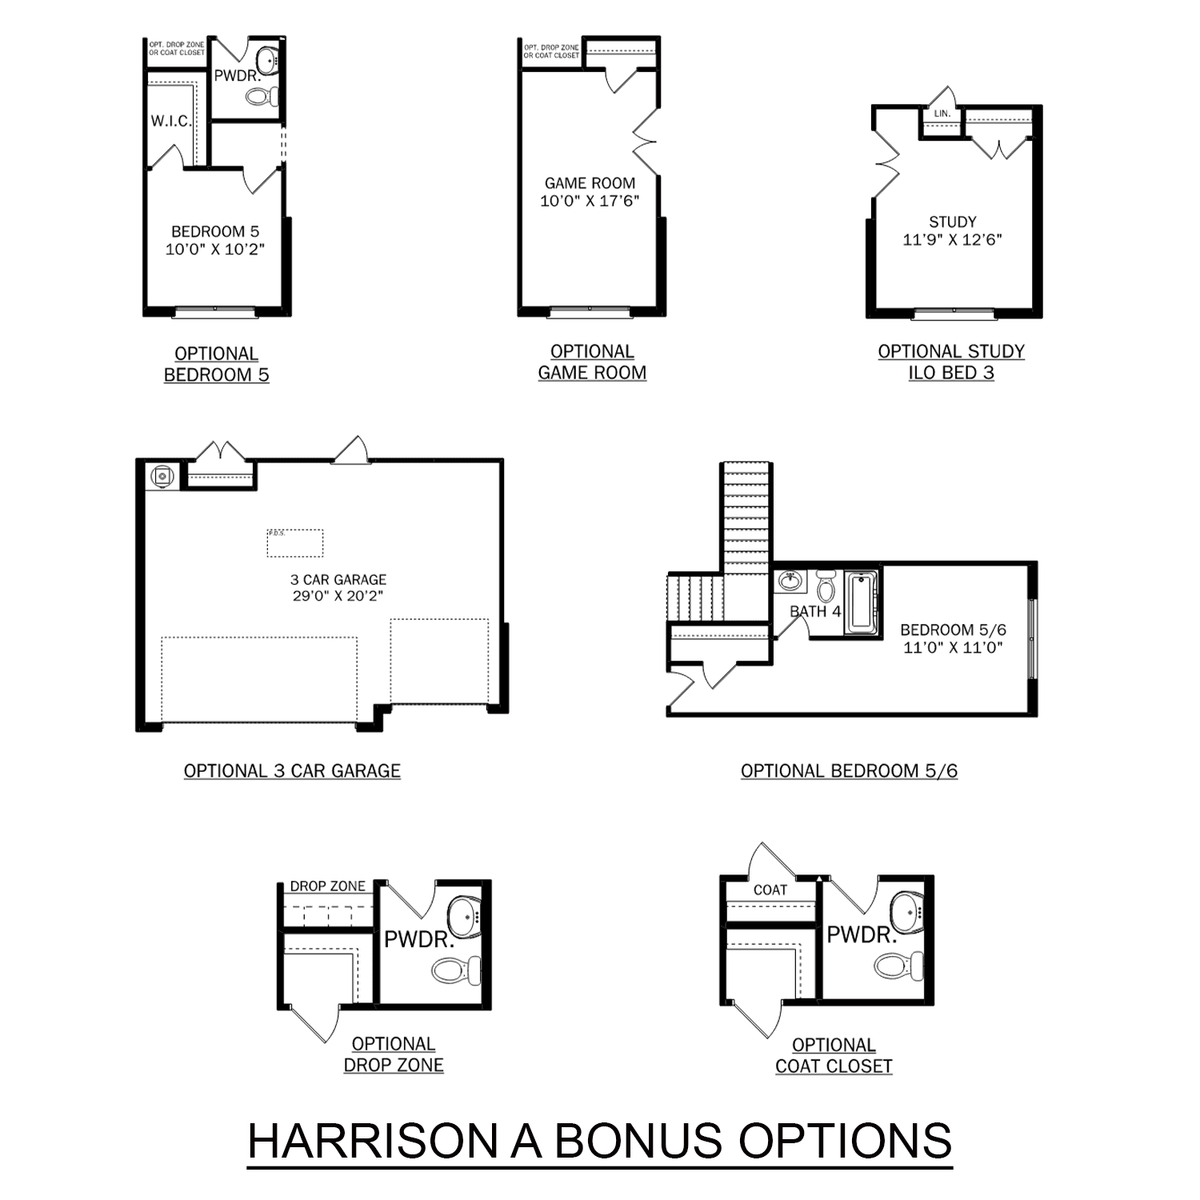 3 - The Harrison with Bonus floor plan layout for 605 Ronnie Drive SE in Davidson Homes' Cain Park community.